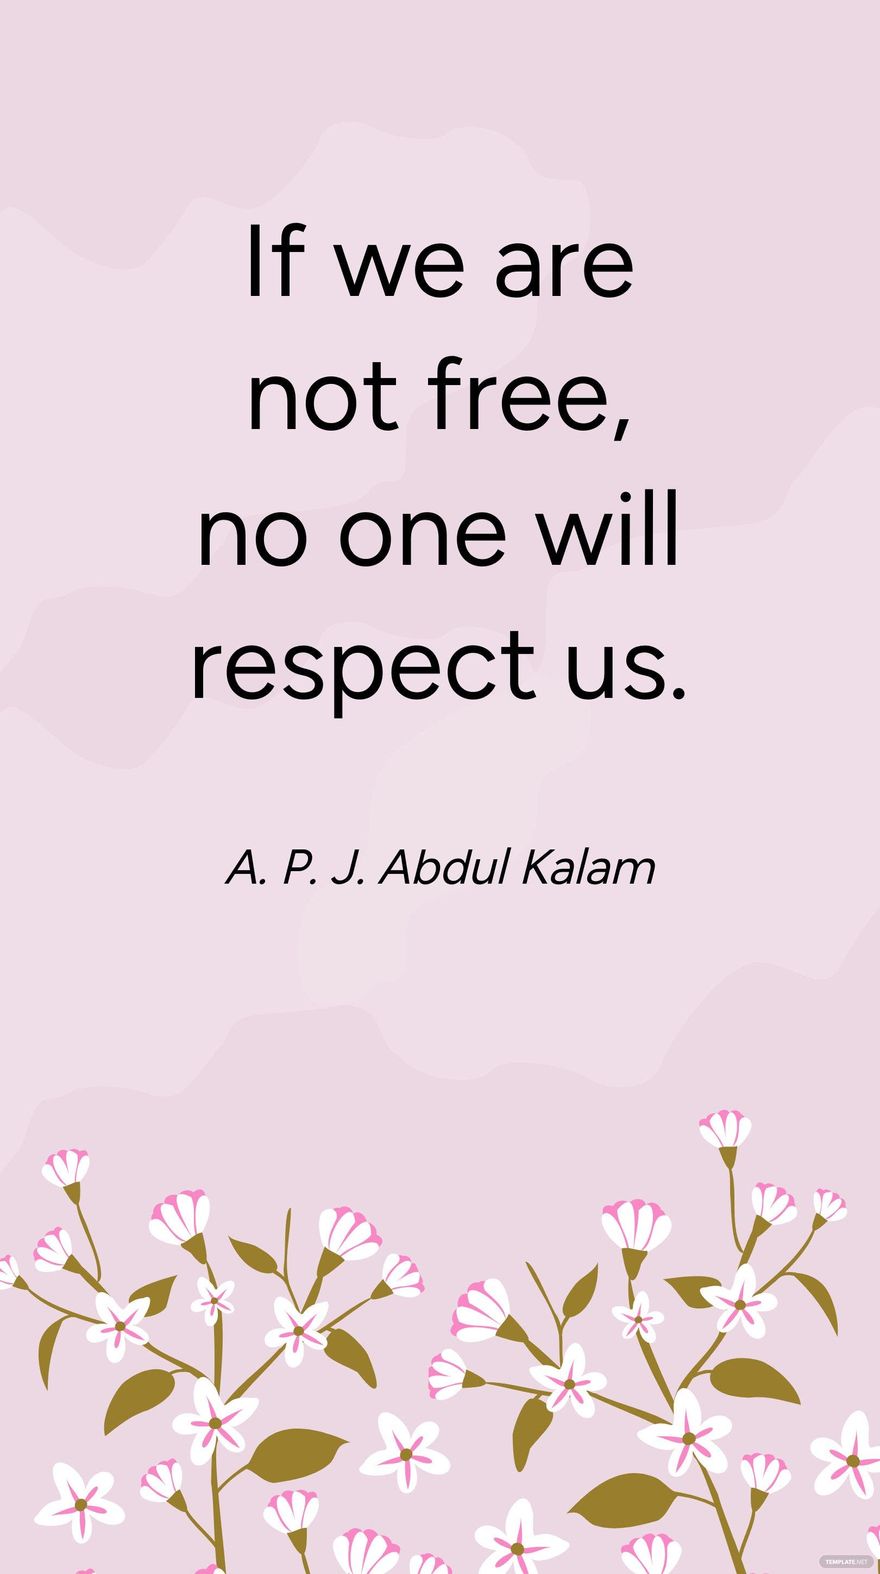 A. P. J. Abdul Kalam - If we are not free, no one will respect us.